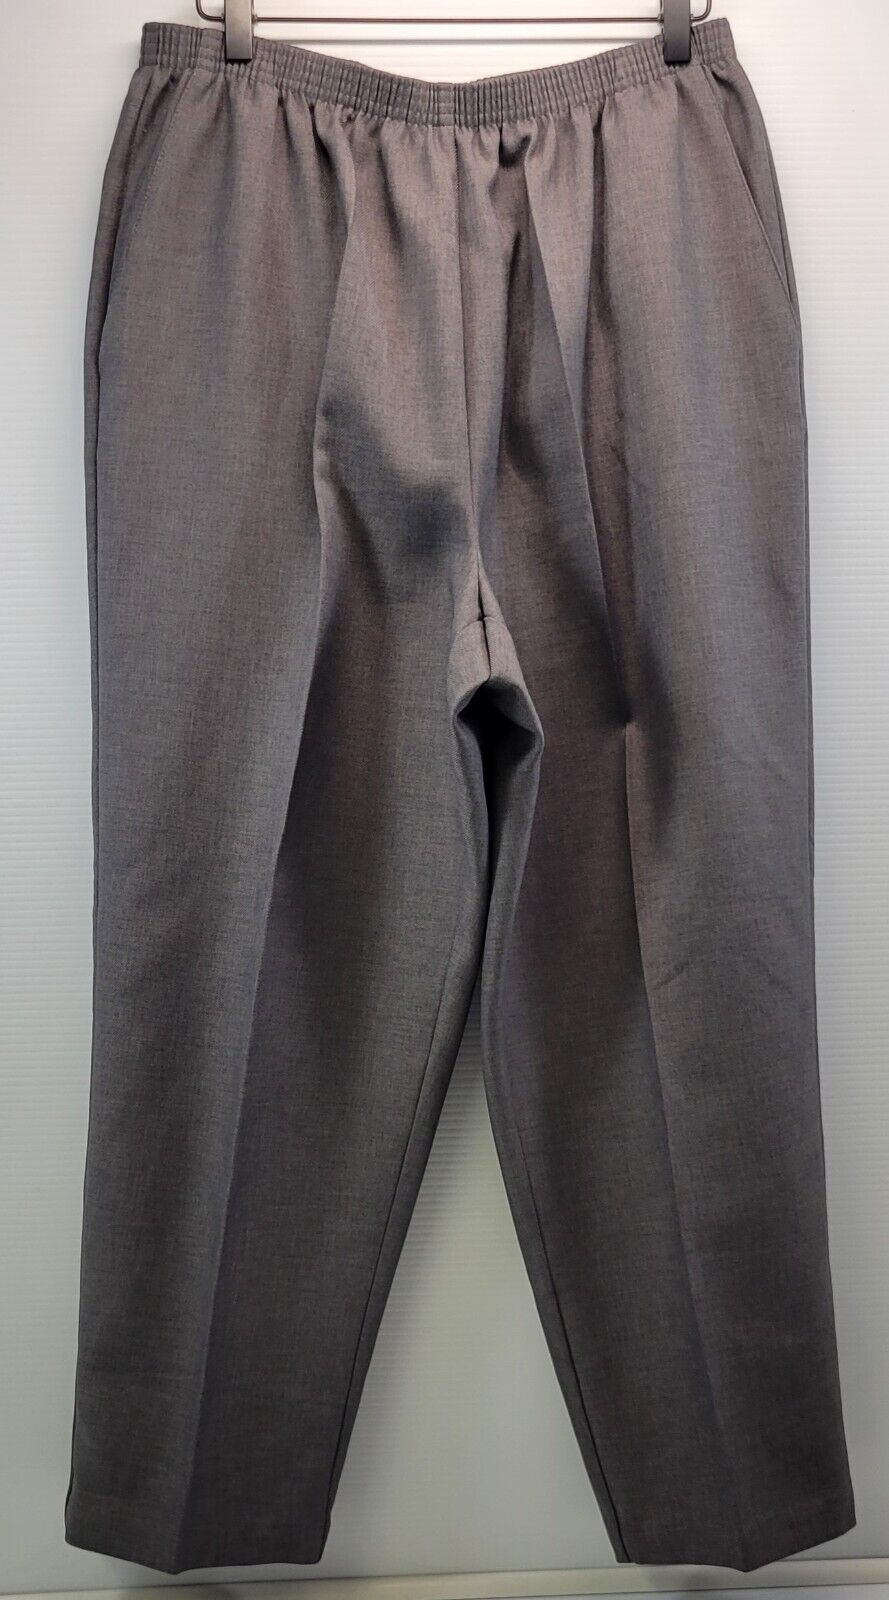 Primary image for AP) Alfred Dunner Women Gray Pants Petite 16P Polyester